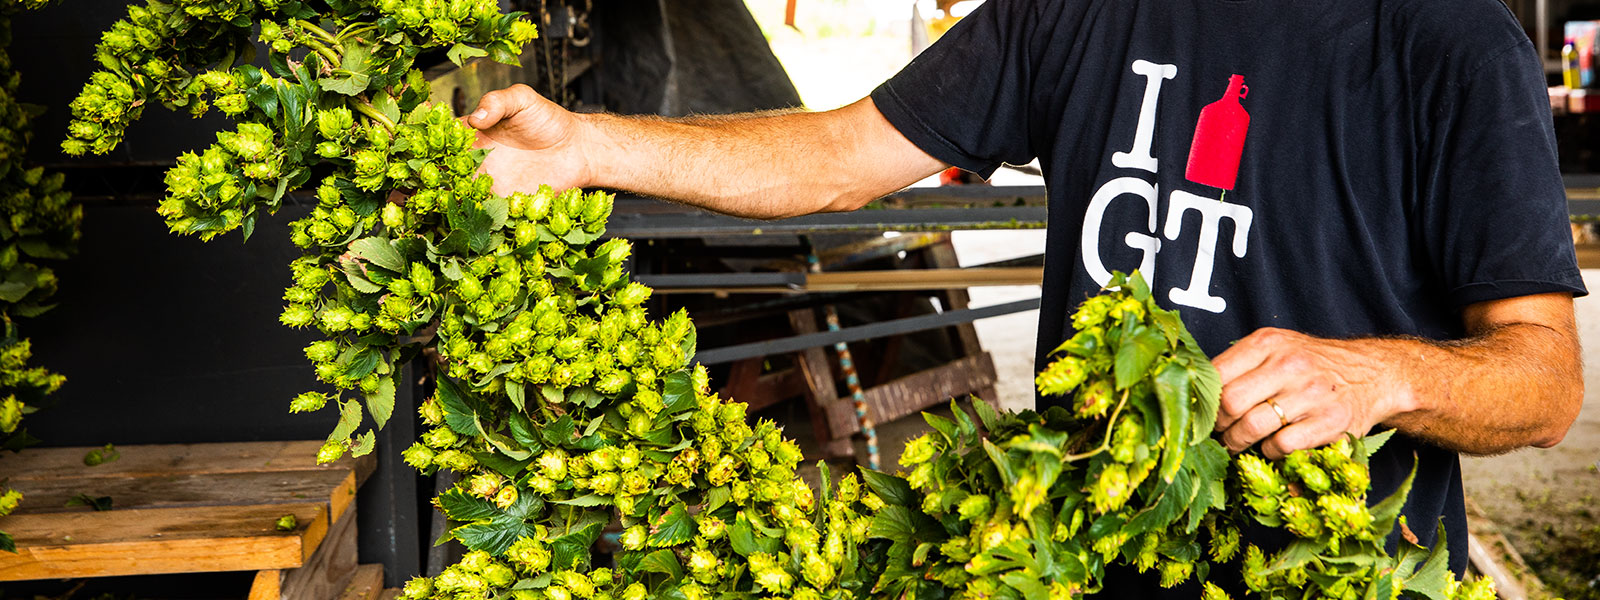 Hops farms are growing across the country.